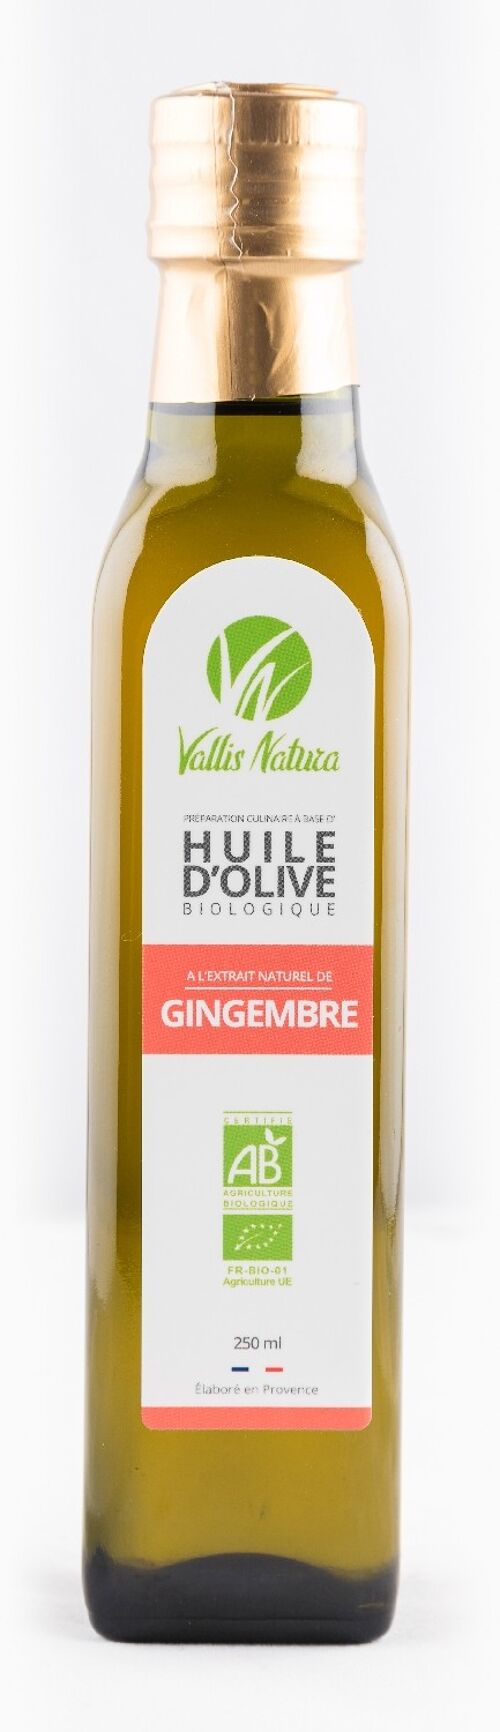 Huile d’olive extra vierge saveur gingembre BIO 250ml